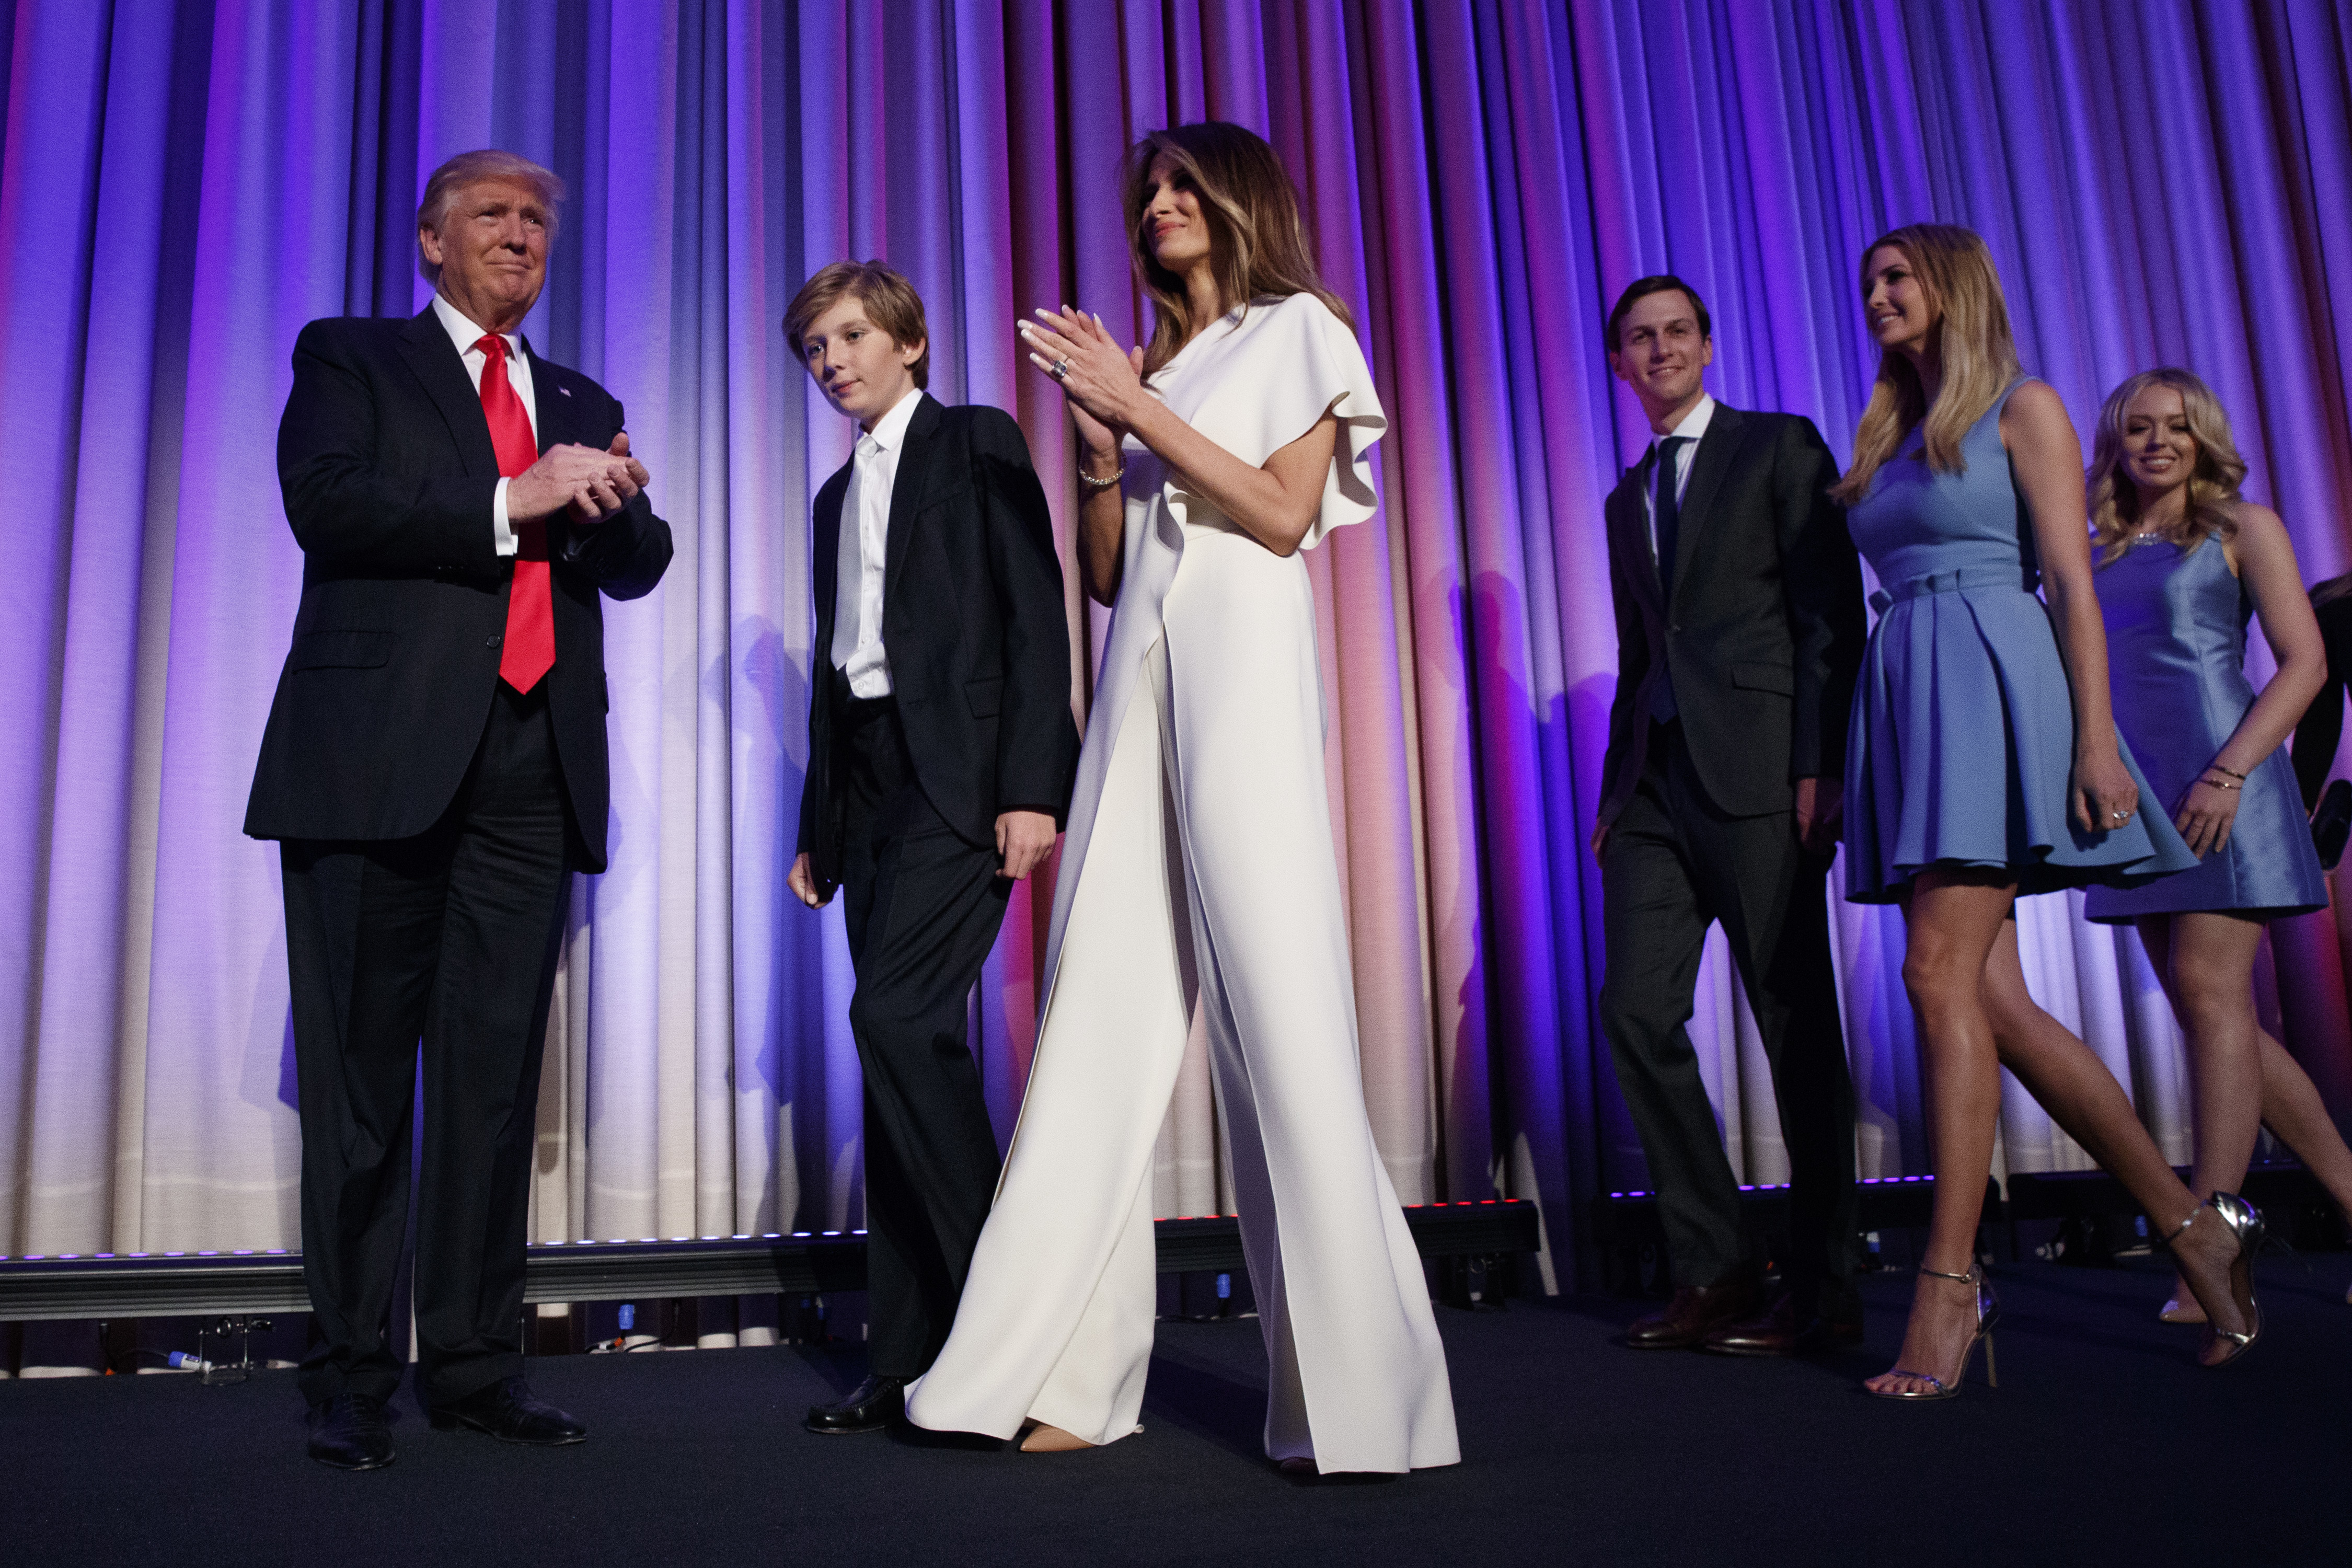 FILE - This Nov. 9, 2016 file photo shows Republican presidential candidate Donald Trump, left, arriving to speak to an election night rally in New York with his son Barron, from second left, wife Melania, son-in-law Jared Kushner and daughters Ivanka Trump and Tiffany Trump. Throughout the bruising presidential race, Mrs. Trump kept her look to typical wealthy socialite. Her blouses were often jewel toned, her dresses and jumpsuits from European designers that include Gucci and Roland Mouret, but Americans, too. (AP Photo/ Evan Vucci, File)